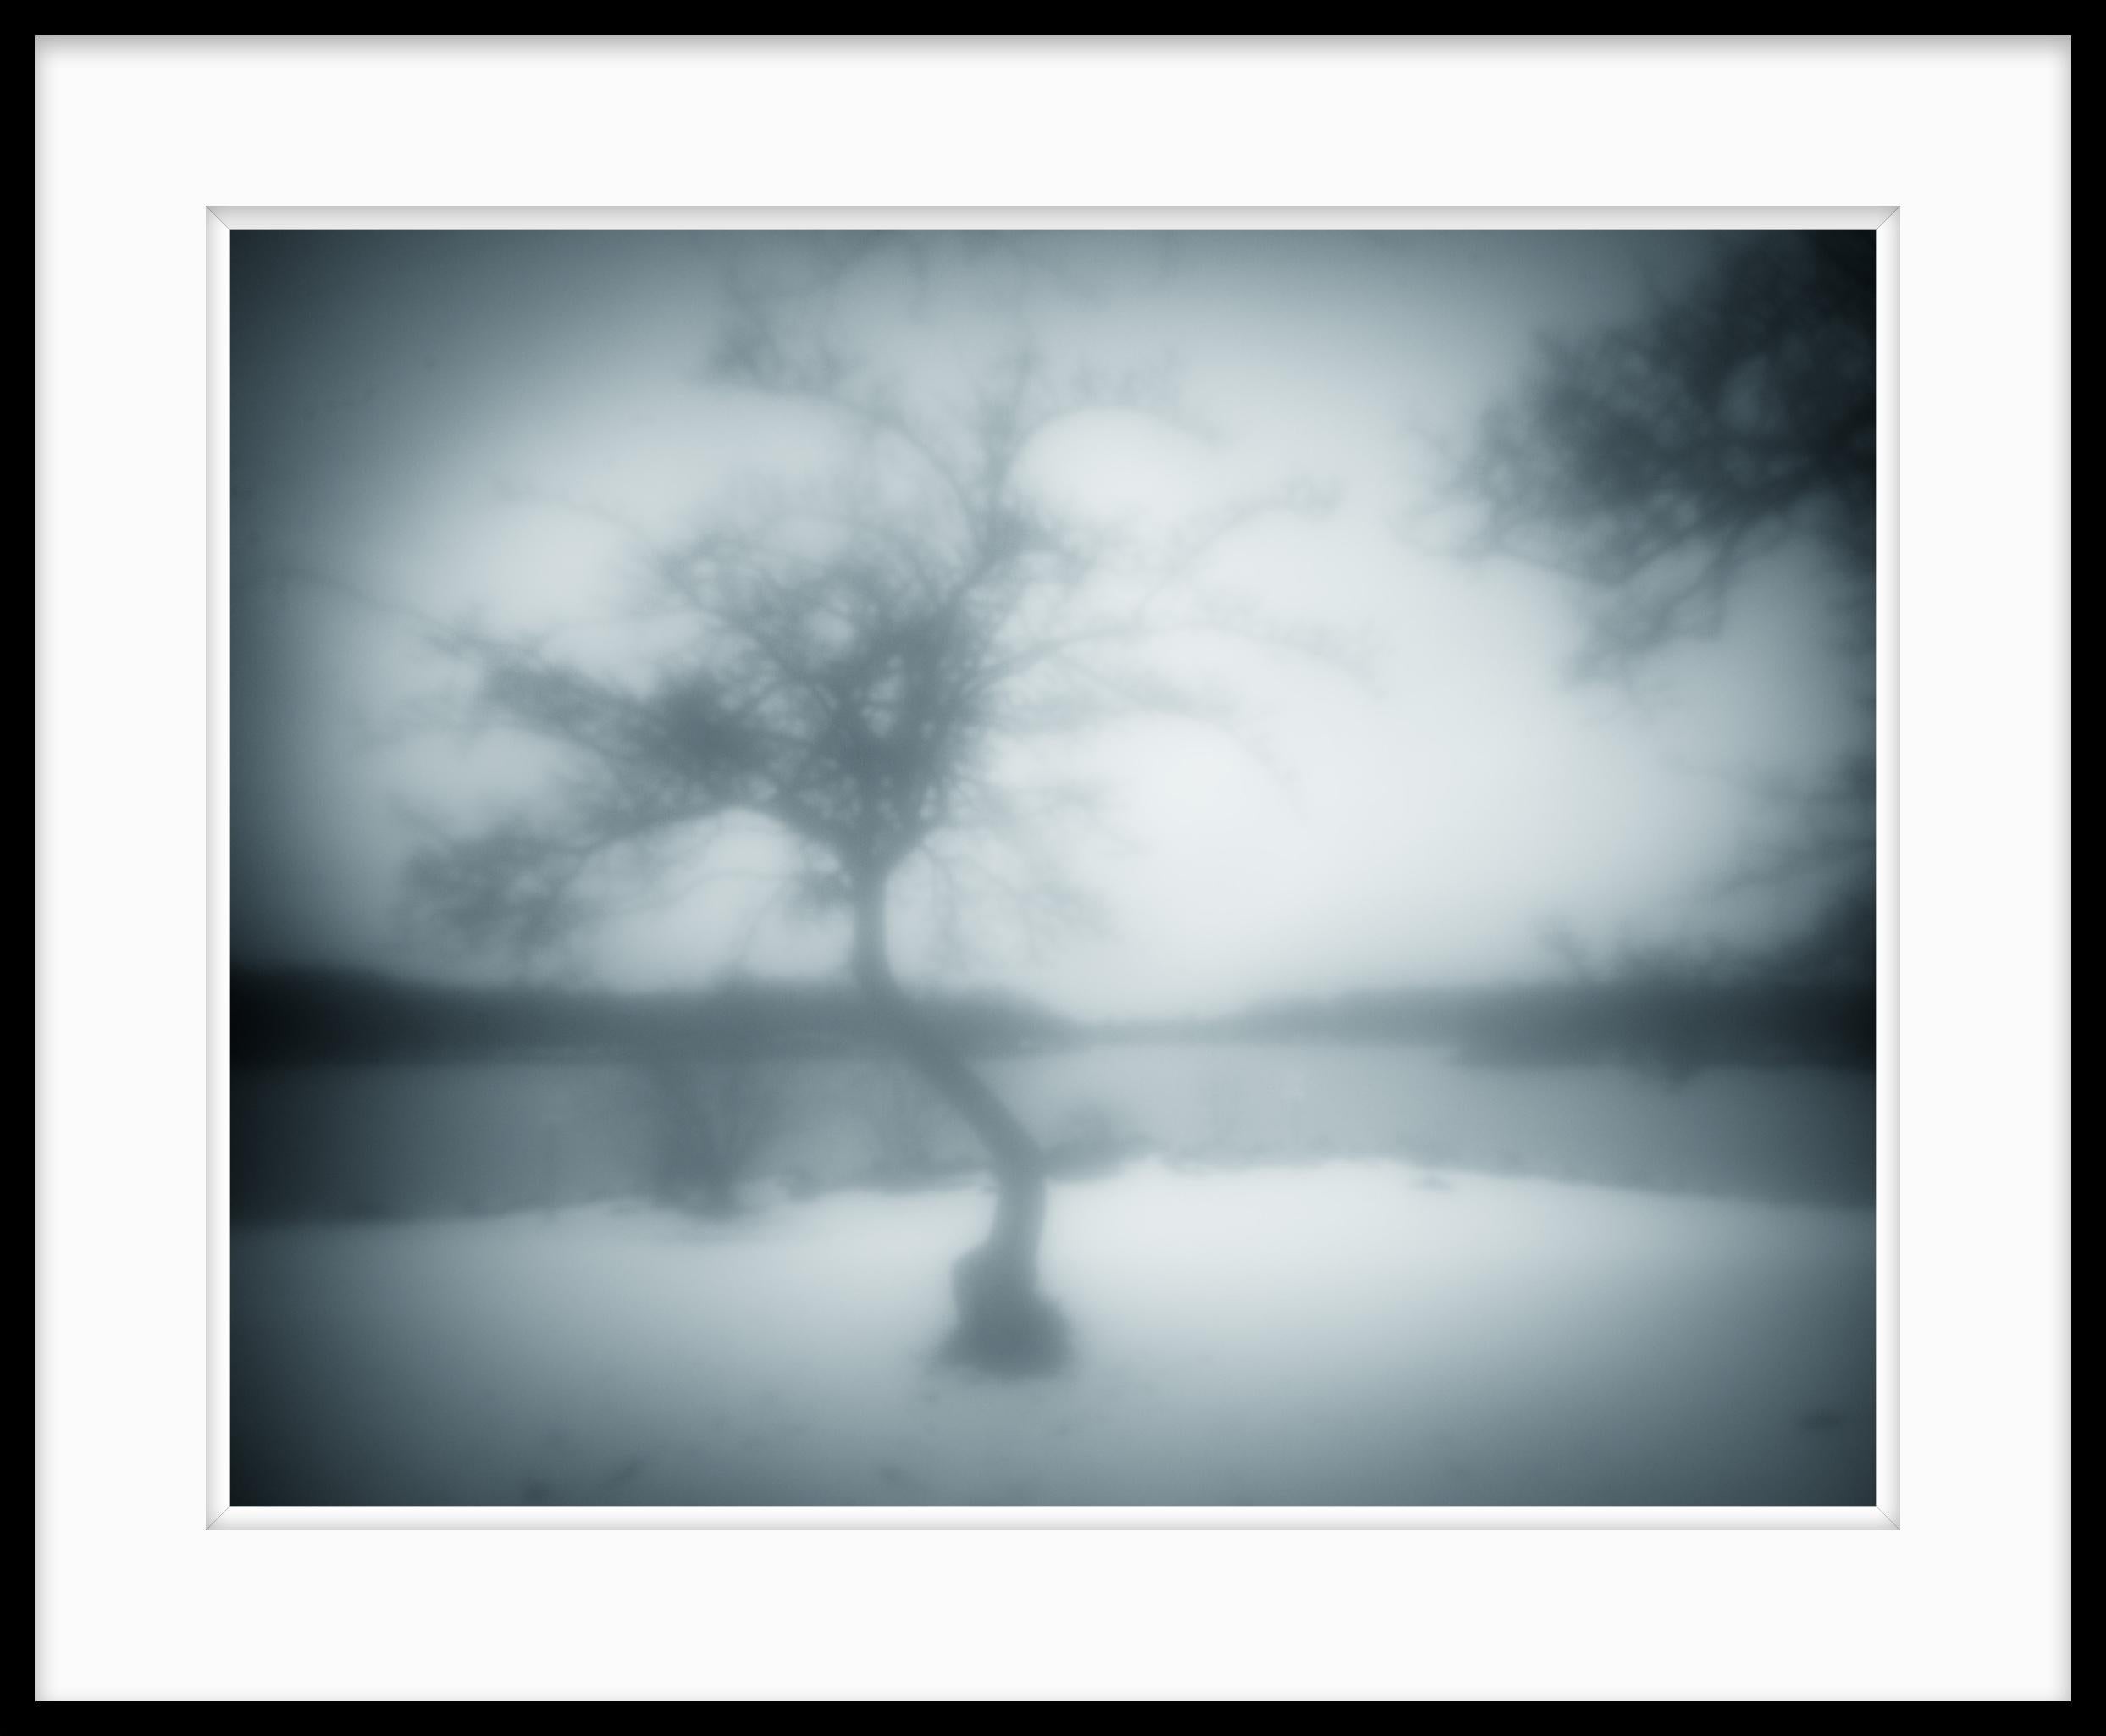 Limited edition black and white cool tone photograph on archival pigment print. A dreamy ethereal photograph made in the winter of 2021 on the edge of a frozen lake. 